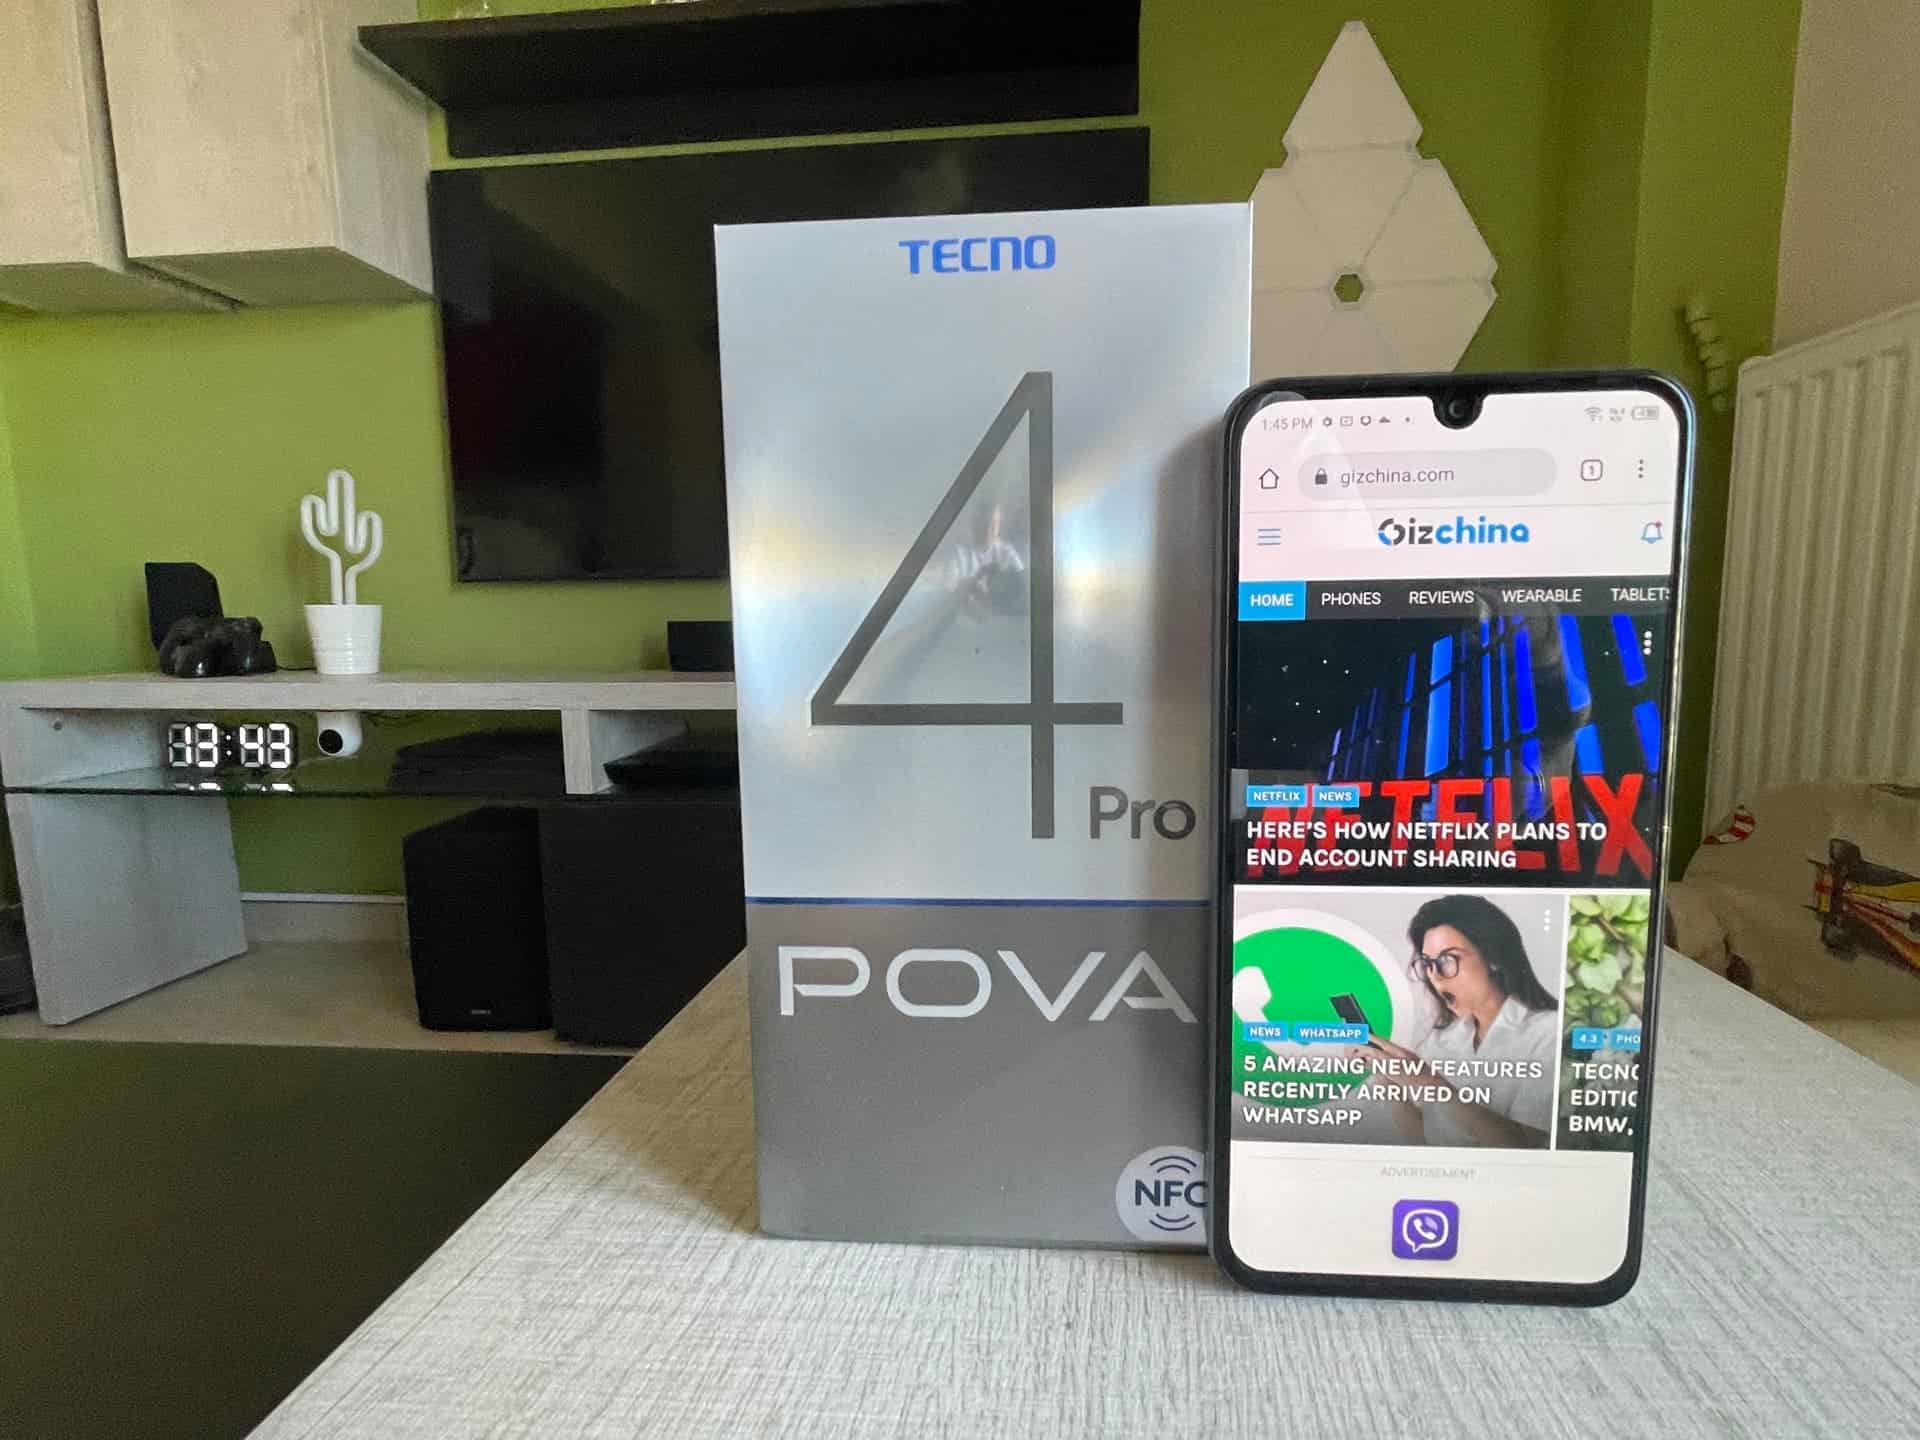 TECNO POVA 4 Pro Review: this is ready for (gaming) battle!